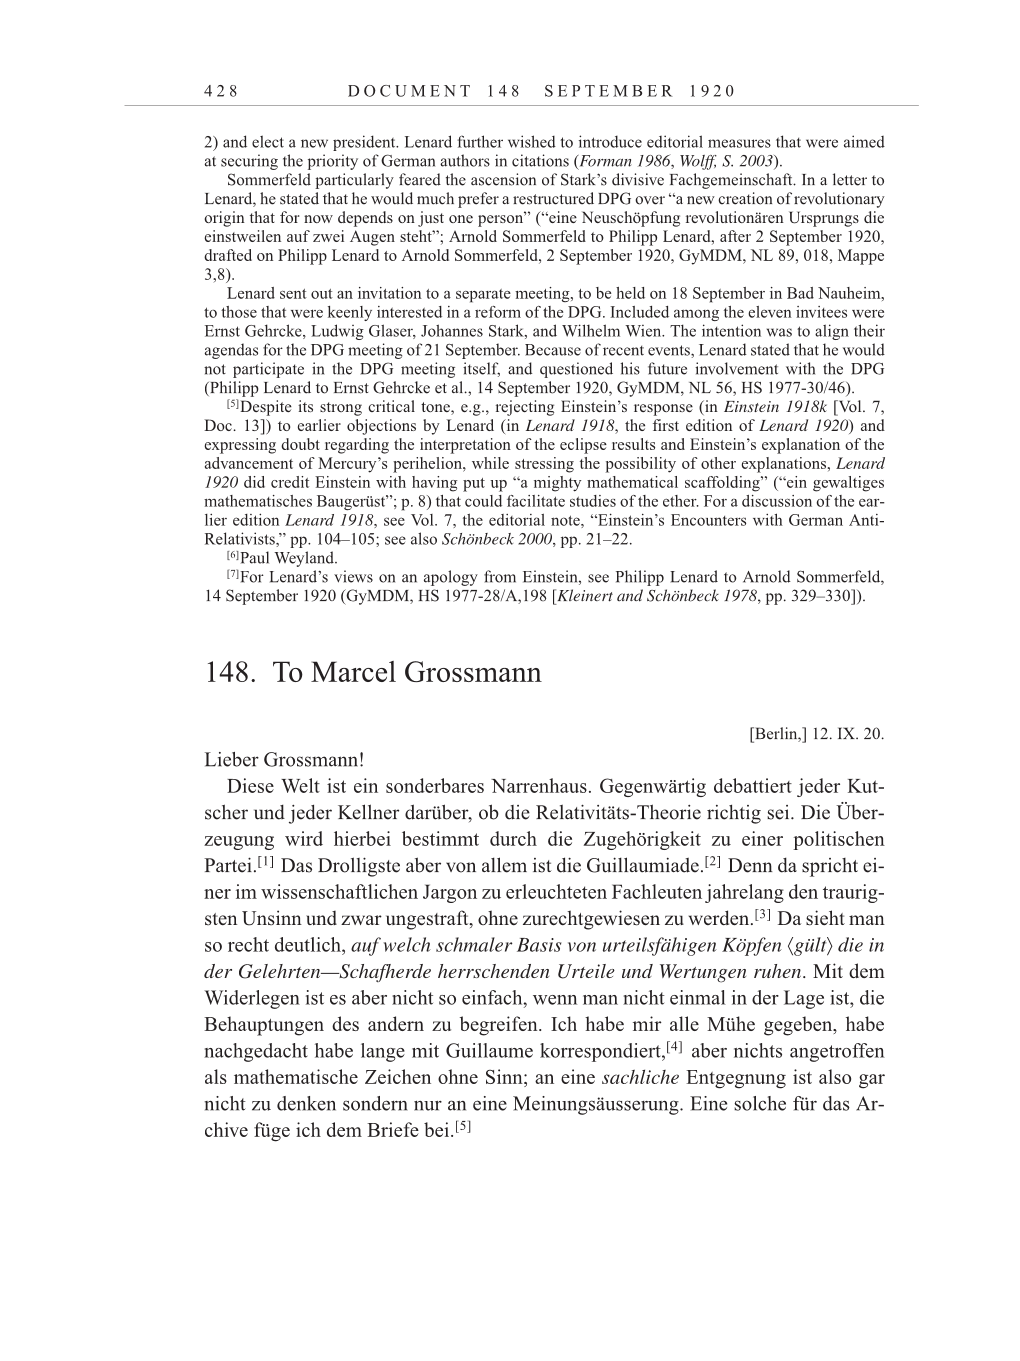 Volume 10: The Berlin Years: Correspondence May-December 1920 / Supplementary Correspondence 1909-1920 page 428